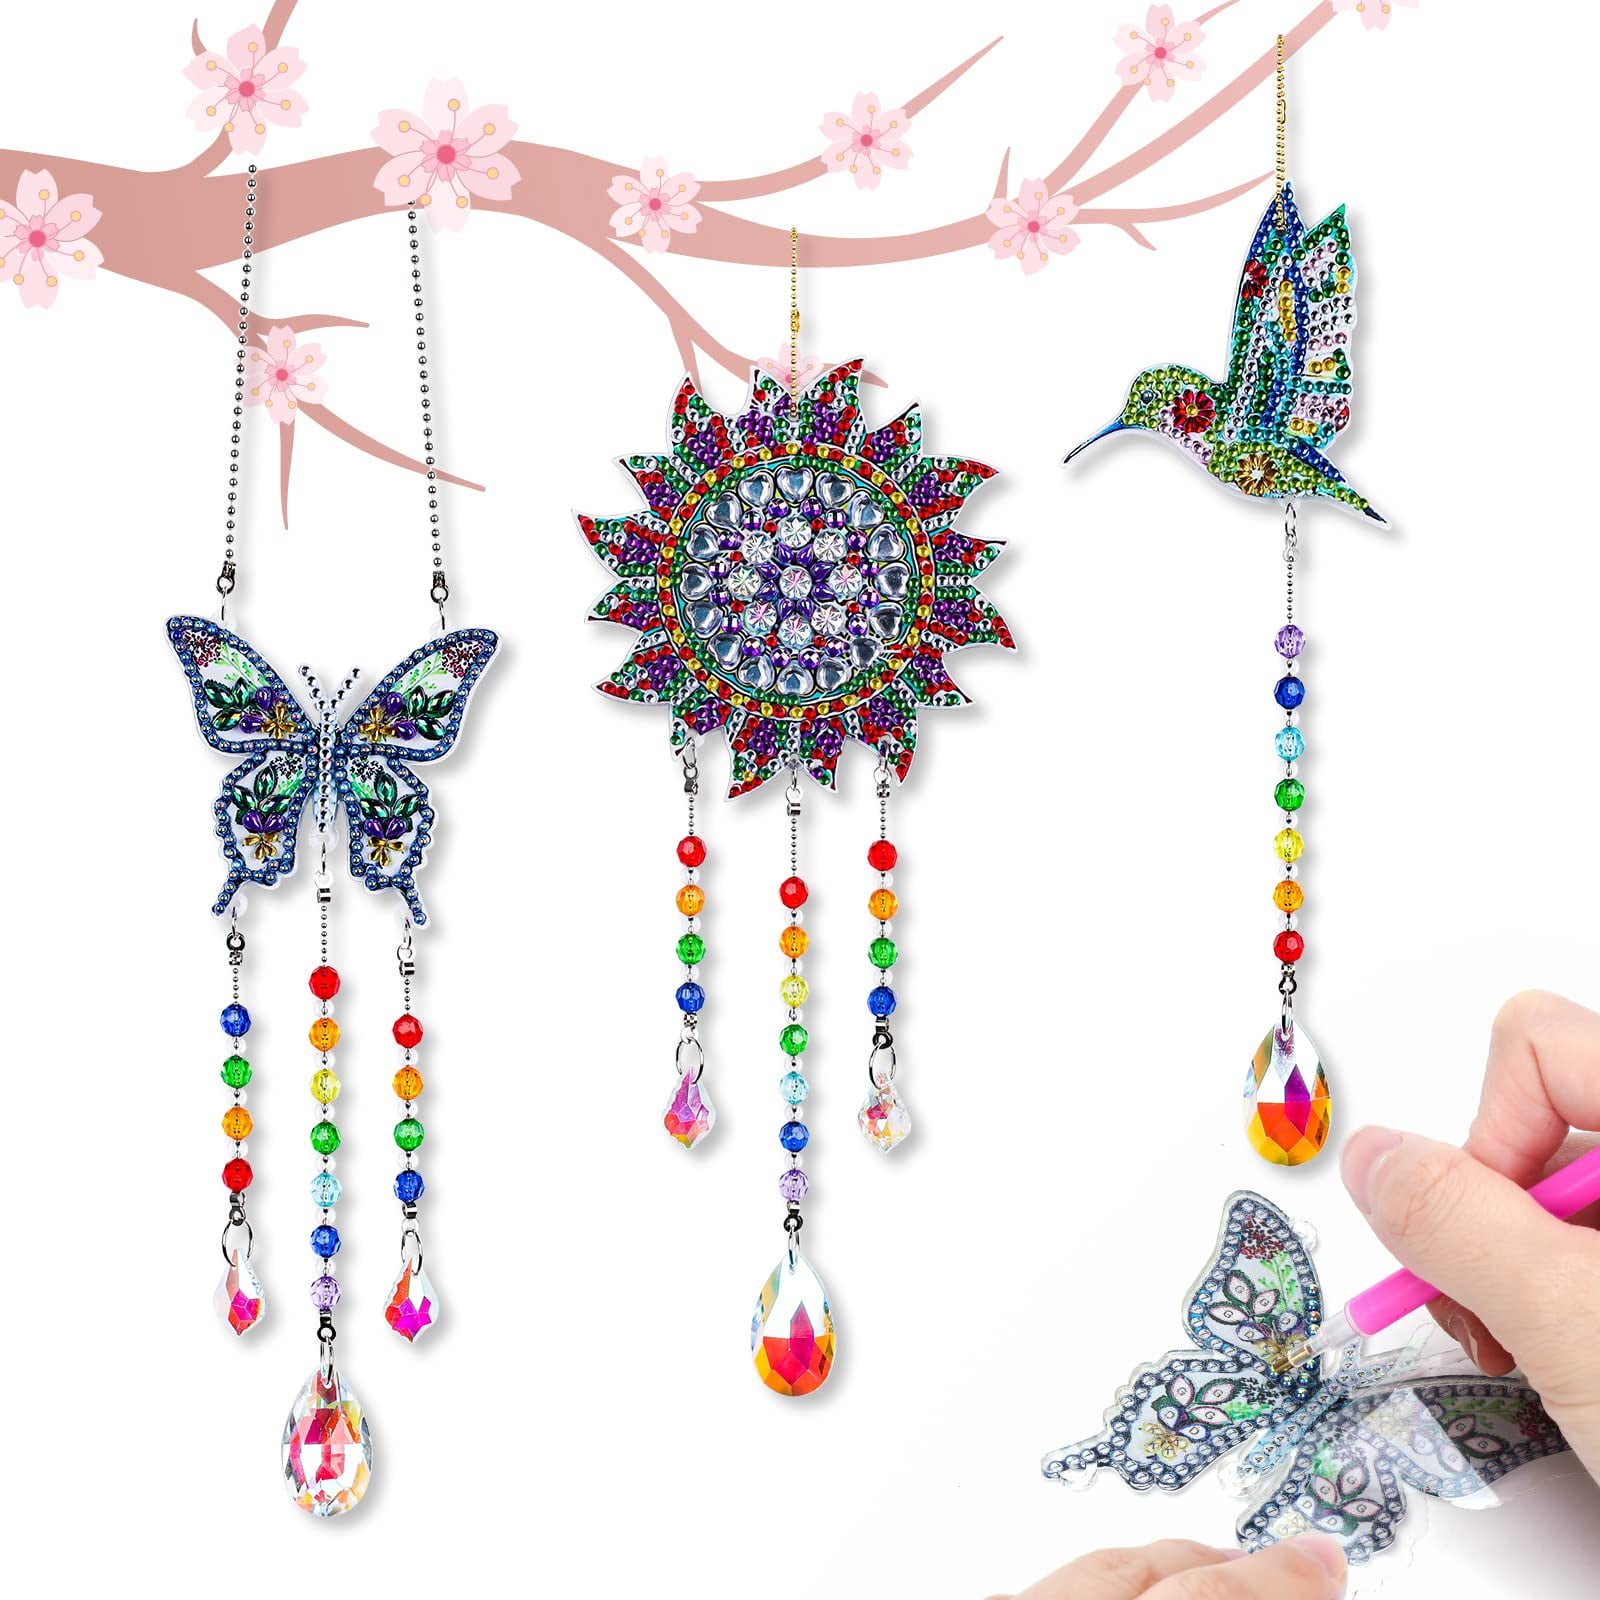  Gift for 6-7-8-9-10 Yeal Old Girls Boys: Arts and Crafts for  Kids Age 6-8-10-12 Diamond Art Wind Chimes Kit for Girl Toys Age 5-11  Present Sun Catcher DIY Paint by